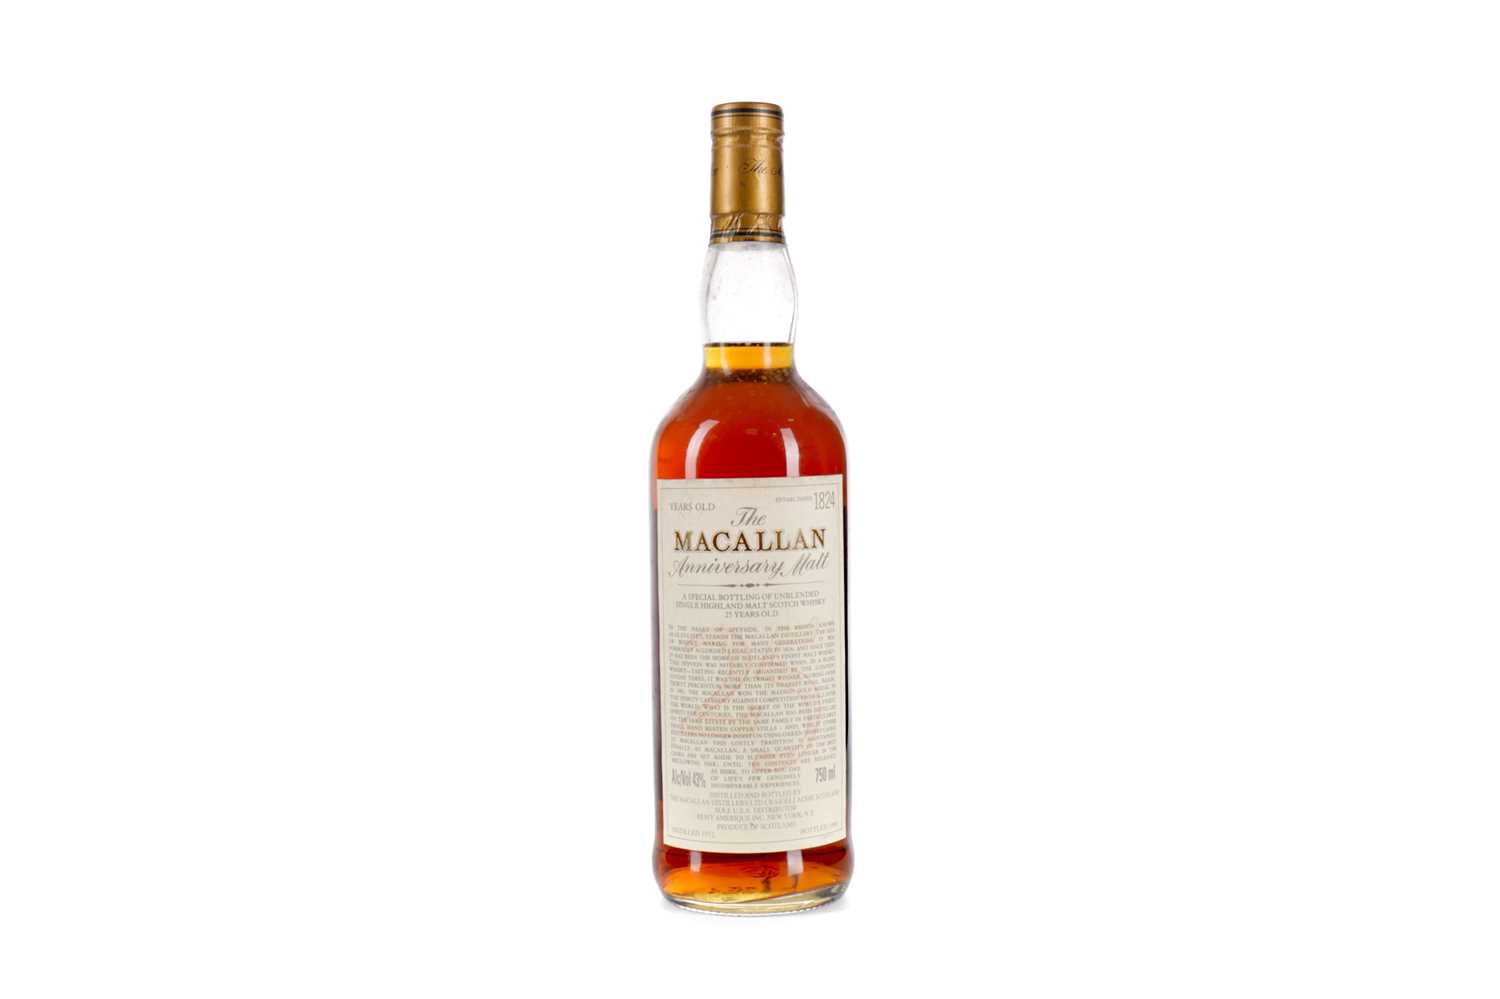 Lot 91 - MACALLAN 1972 ANNIVERSARY MALT 25 YEARS OLD - REMY AMERIQUE INC. IMPORT